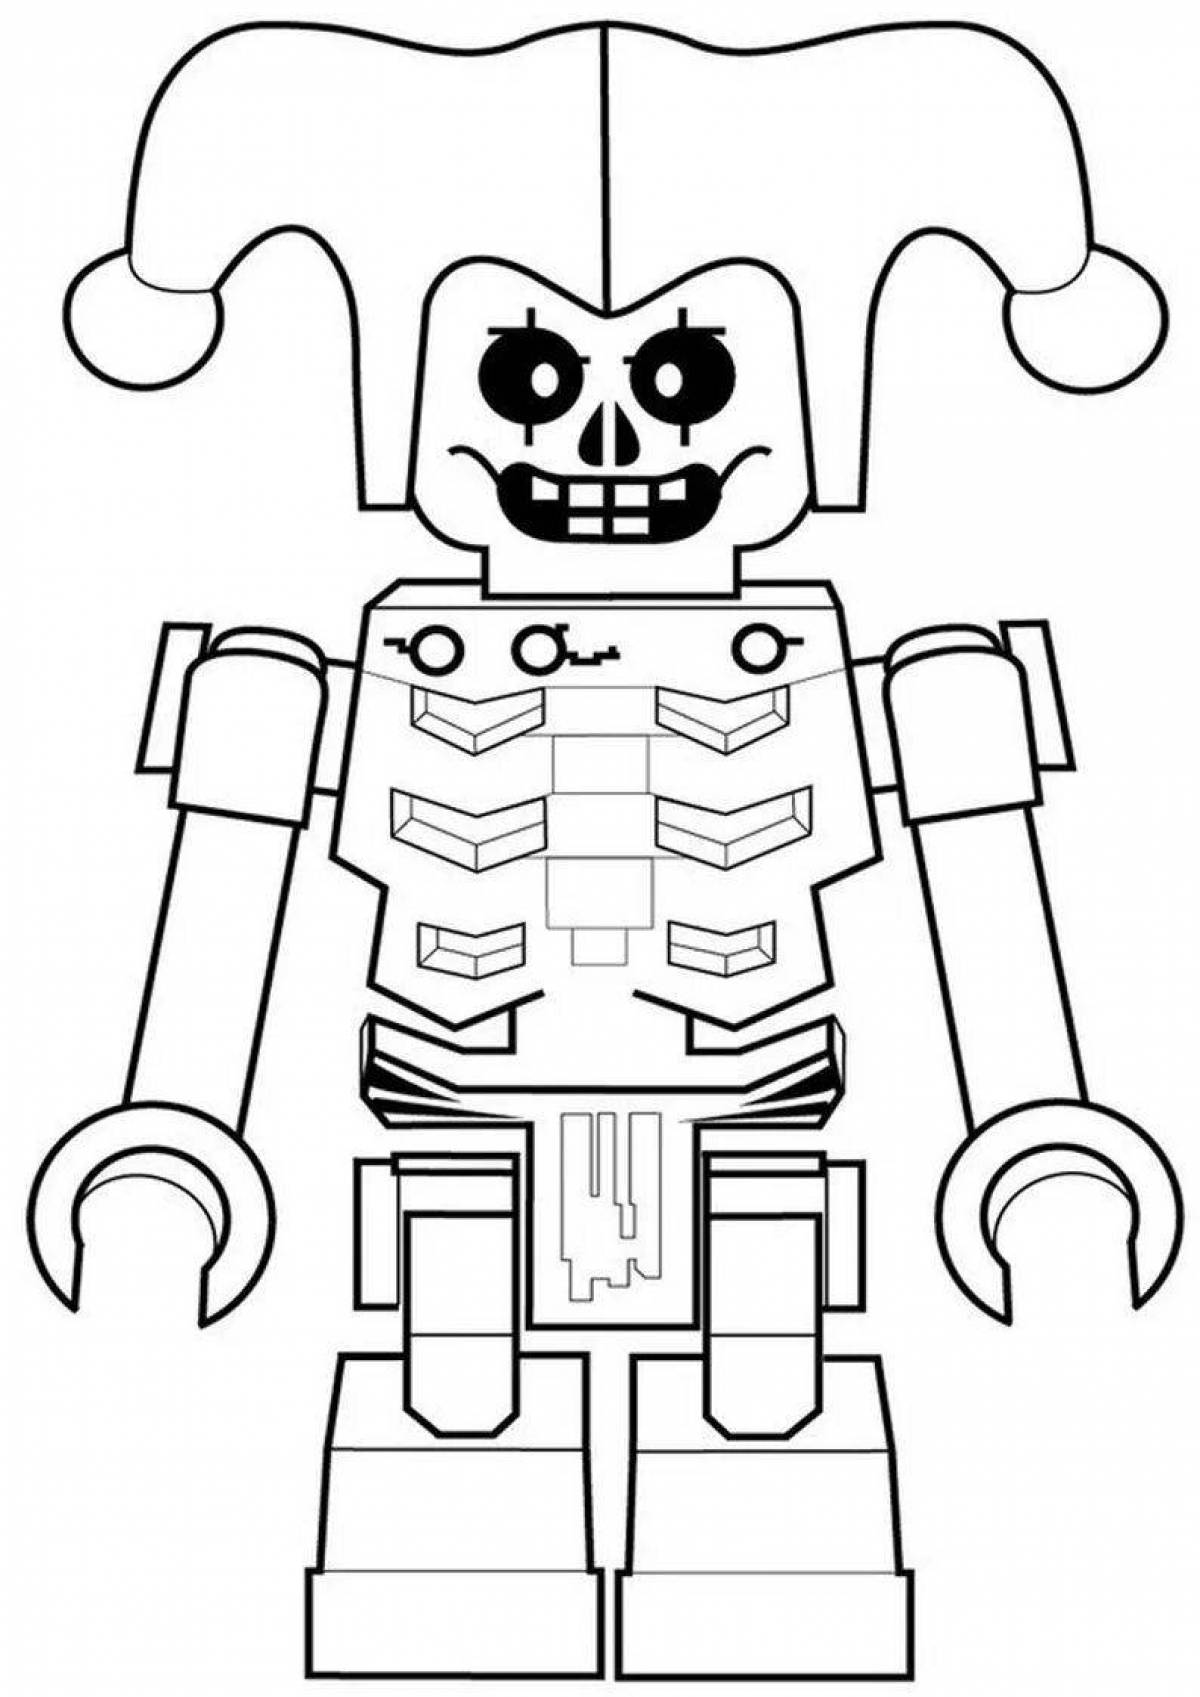 Amazing lego zombie coloring page